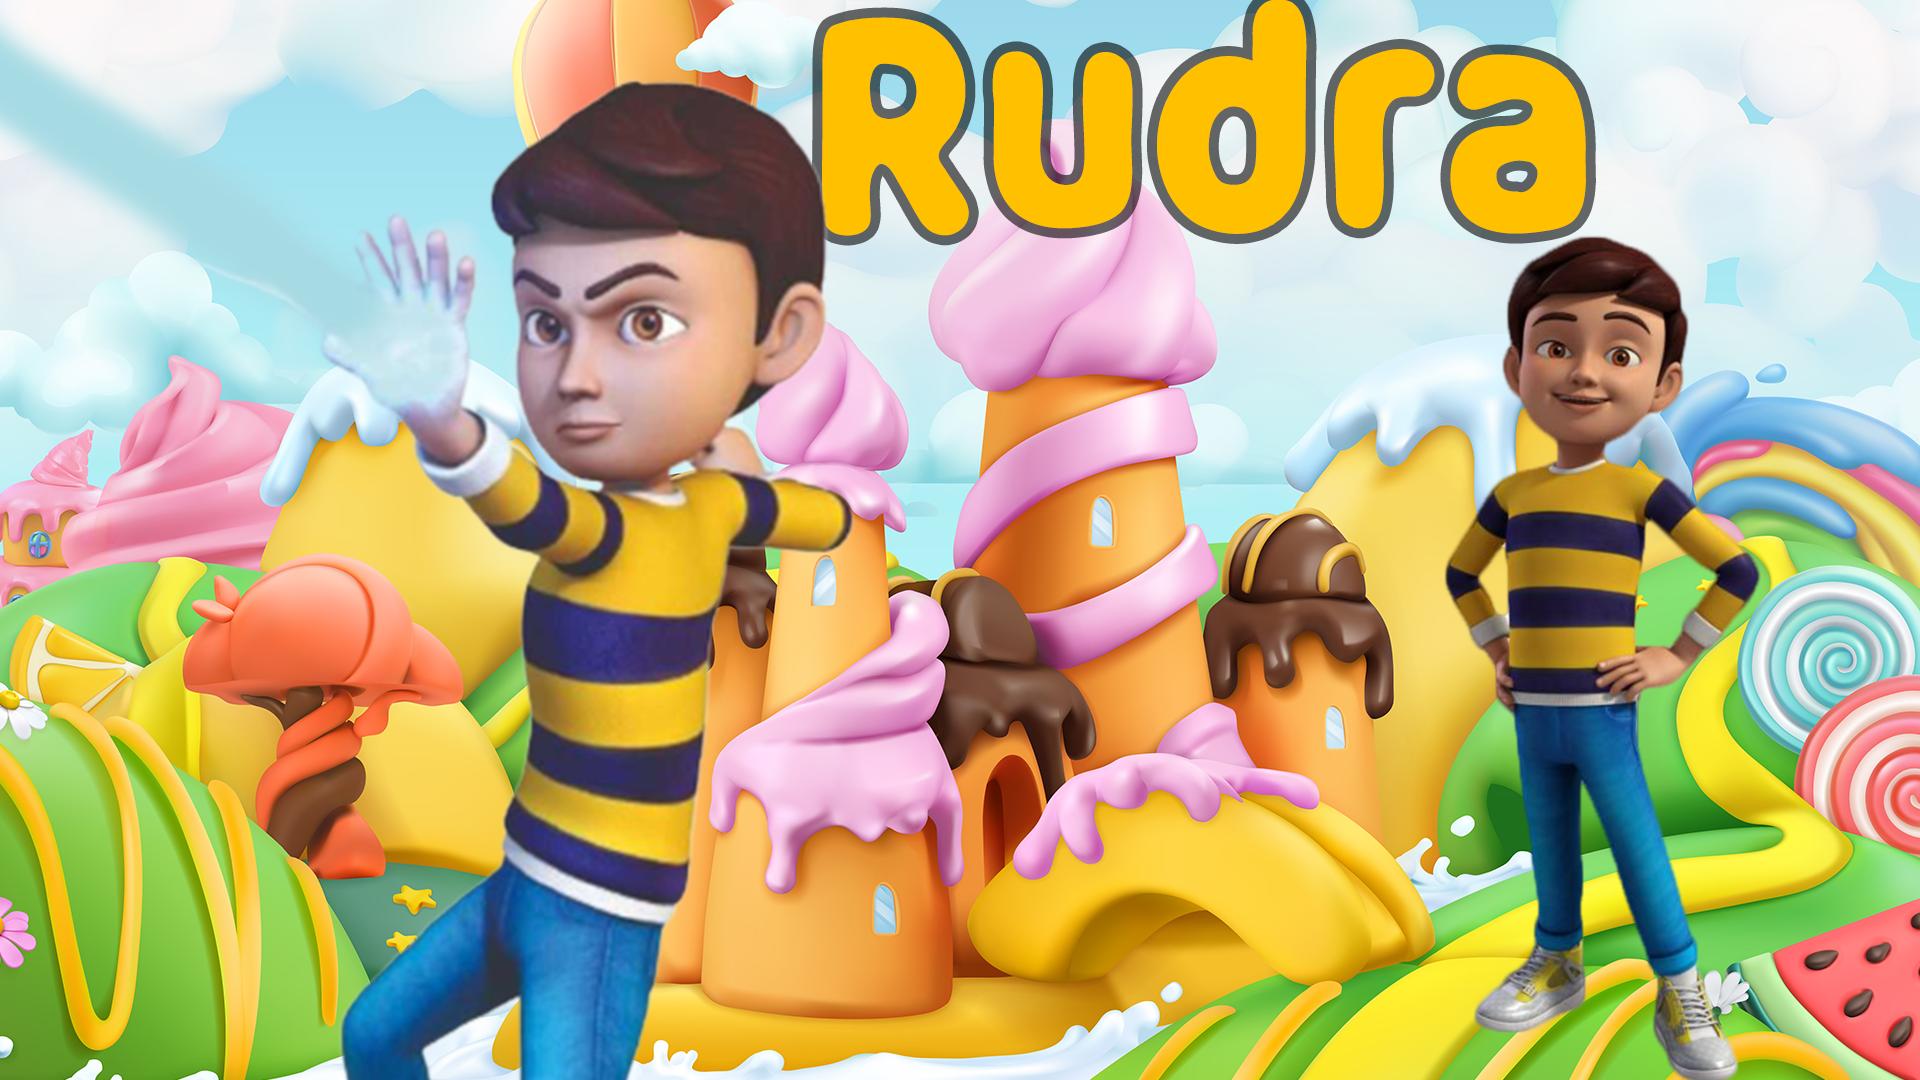 Free download Rudra game boom chik chik boom magic Candy Fight [1920x1080]  for your Desktop, Mobile & Tablet | Explore 21+ Rudra Cartoon Wallpapers |  3d Cartoon Wallpapers, Cartoon Backgrounds, Free Cartoon Wallpaper